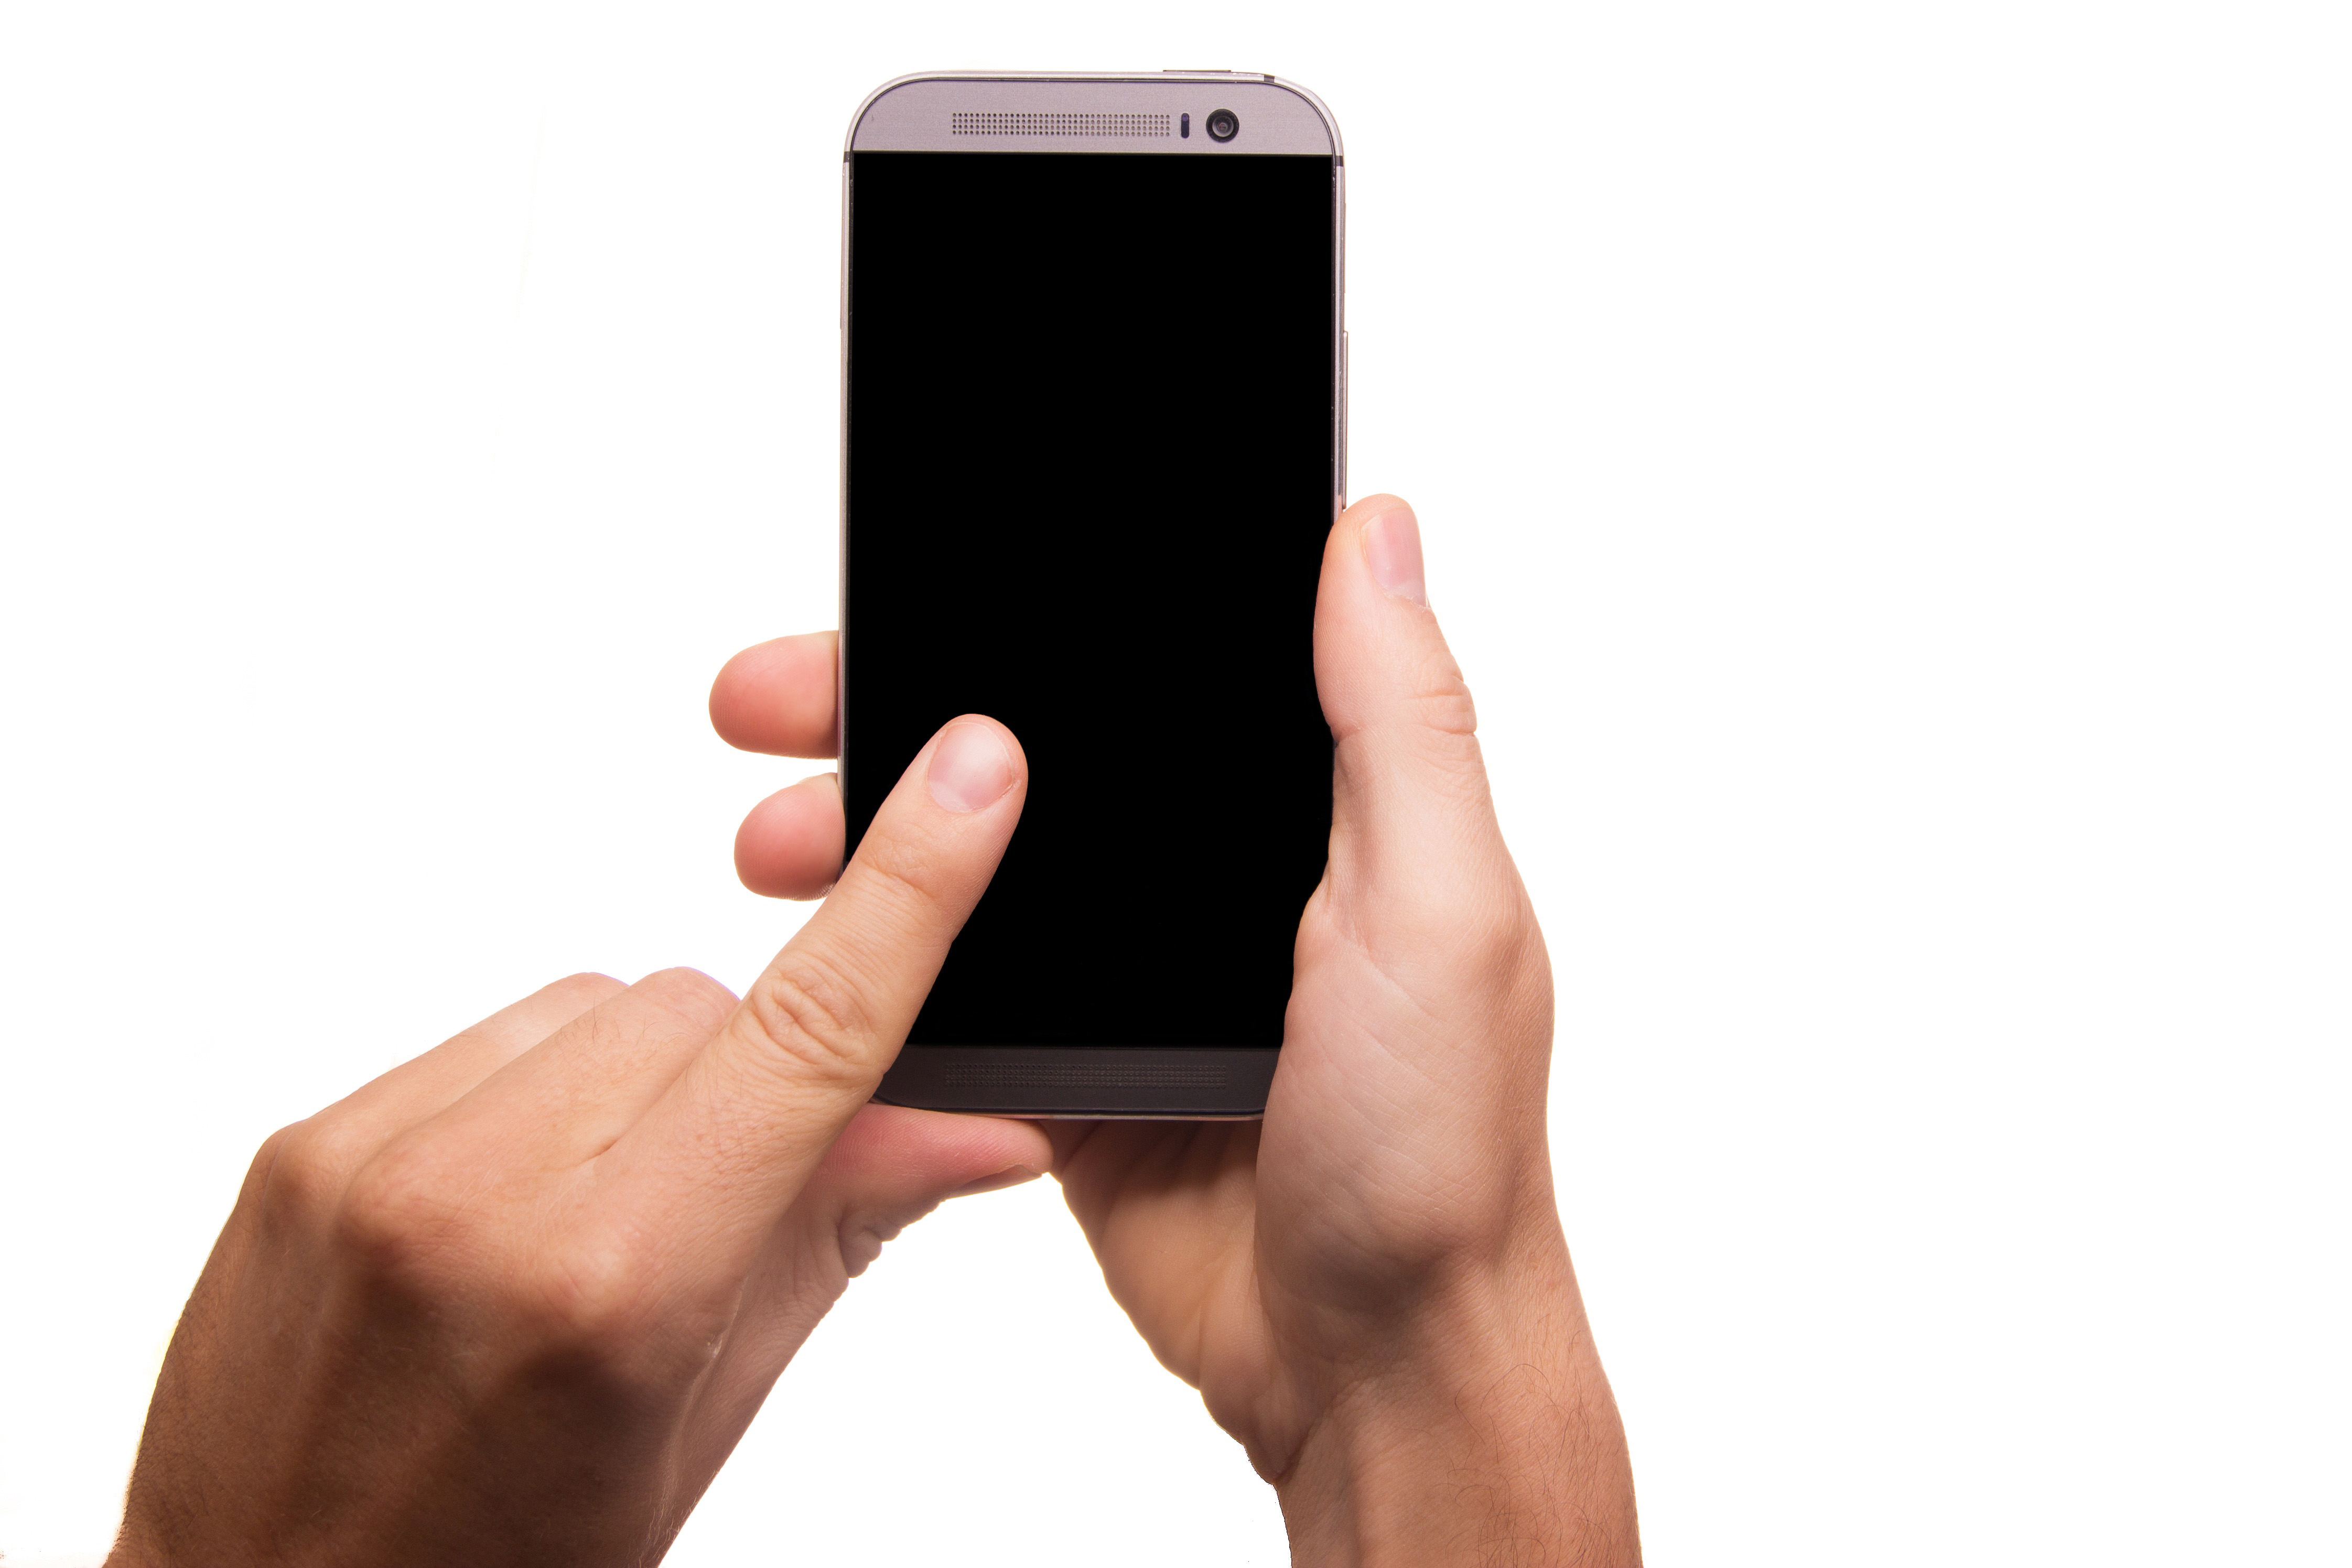 Hand swiping across a cellphone screen image - Free stock photo ...